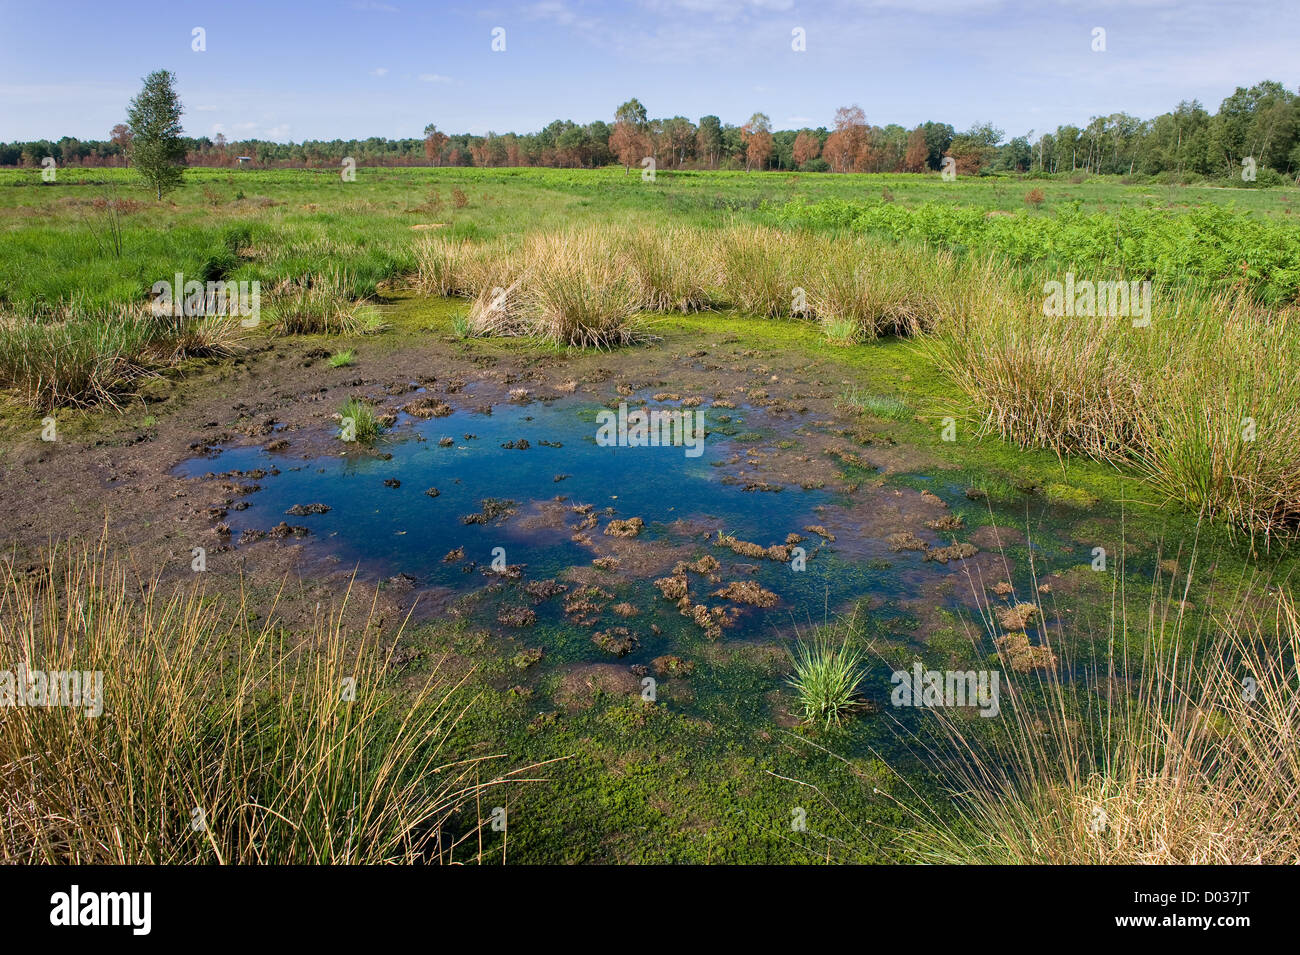 A small pond in a nature reserve in the Netherlands Stock Photo